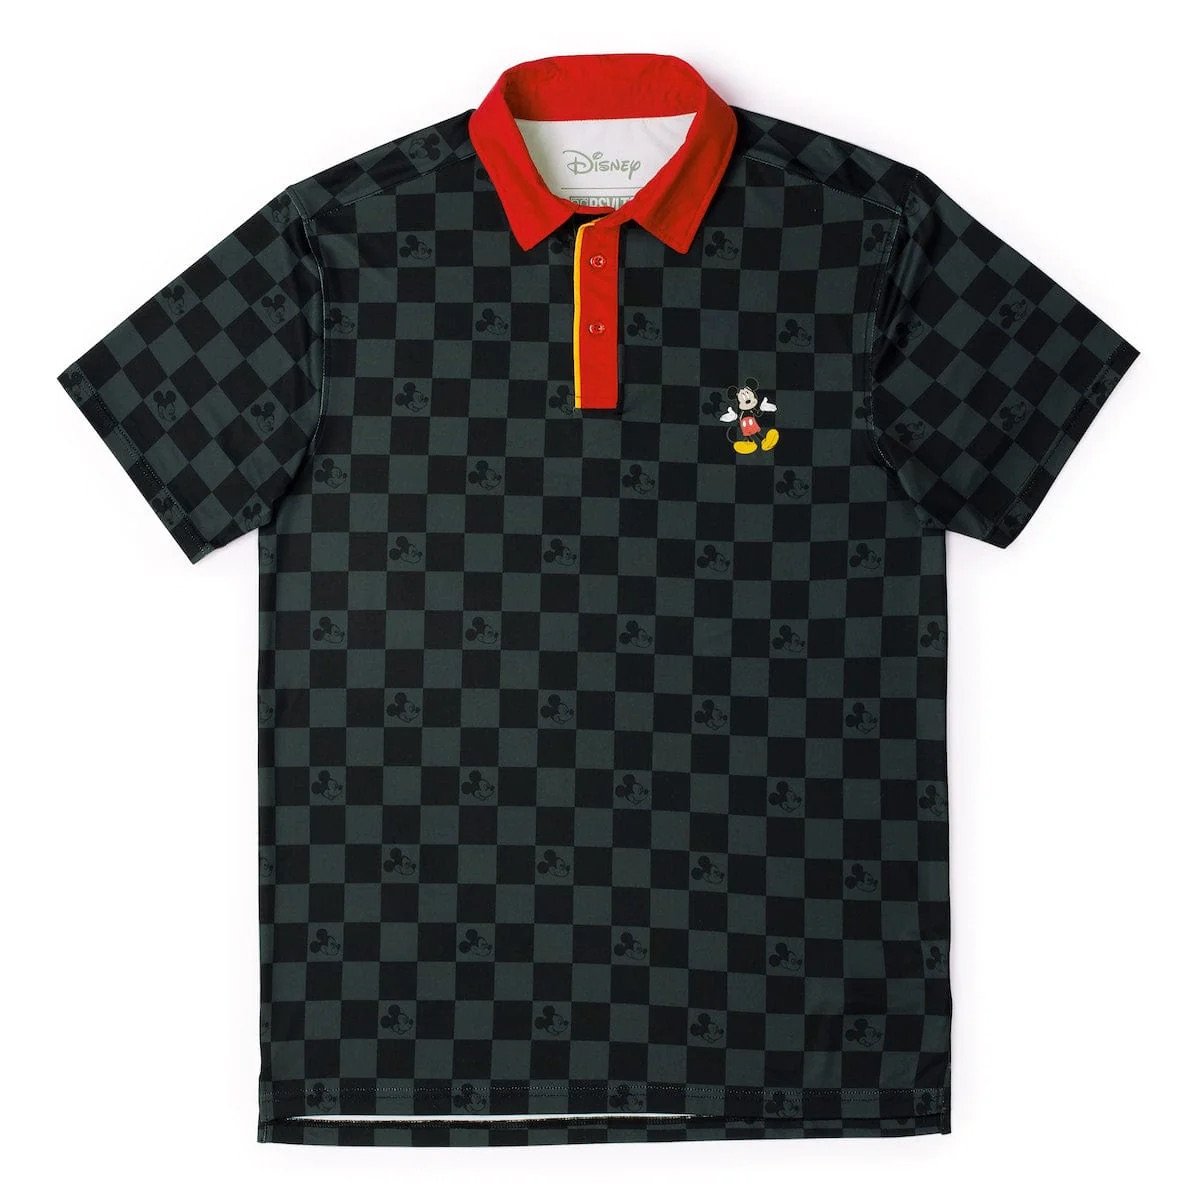 "Check It Out, Pal!" All-Day Polo